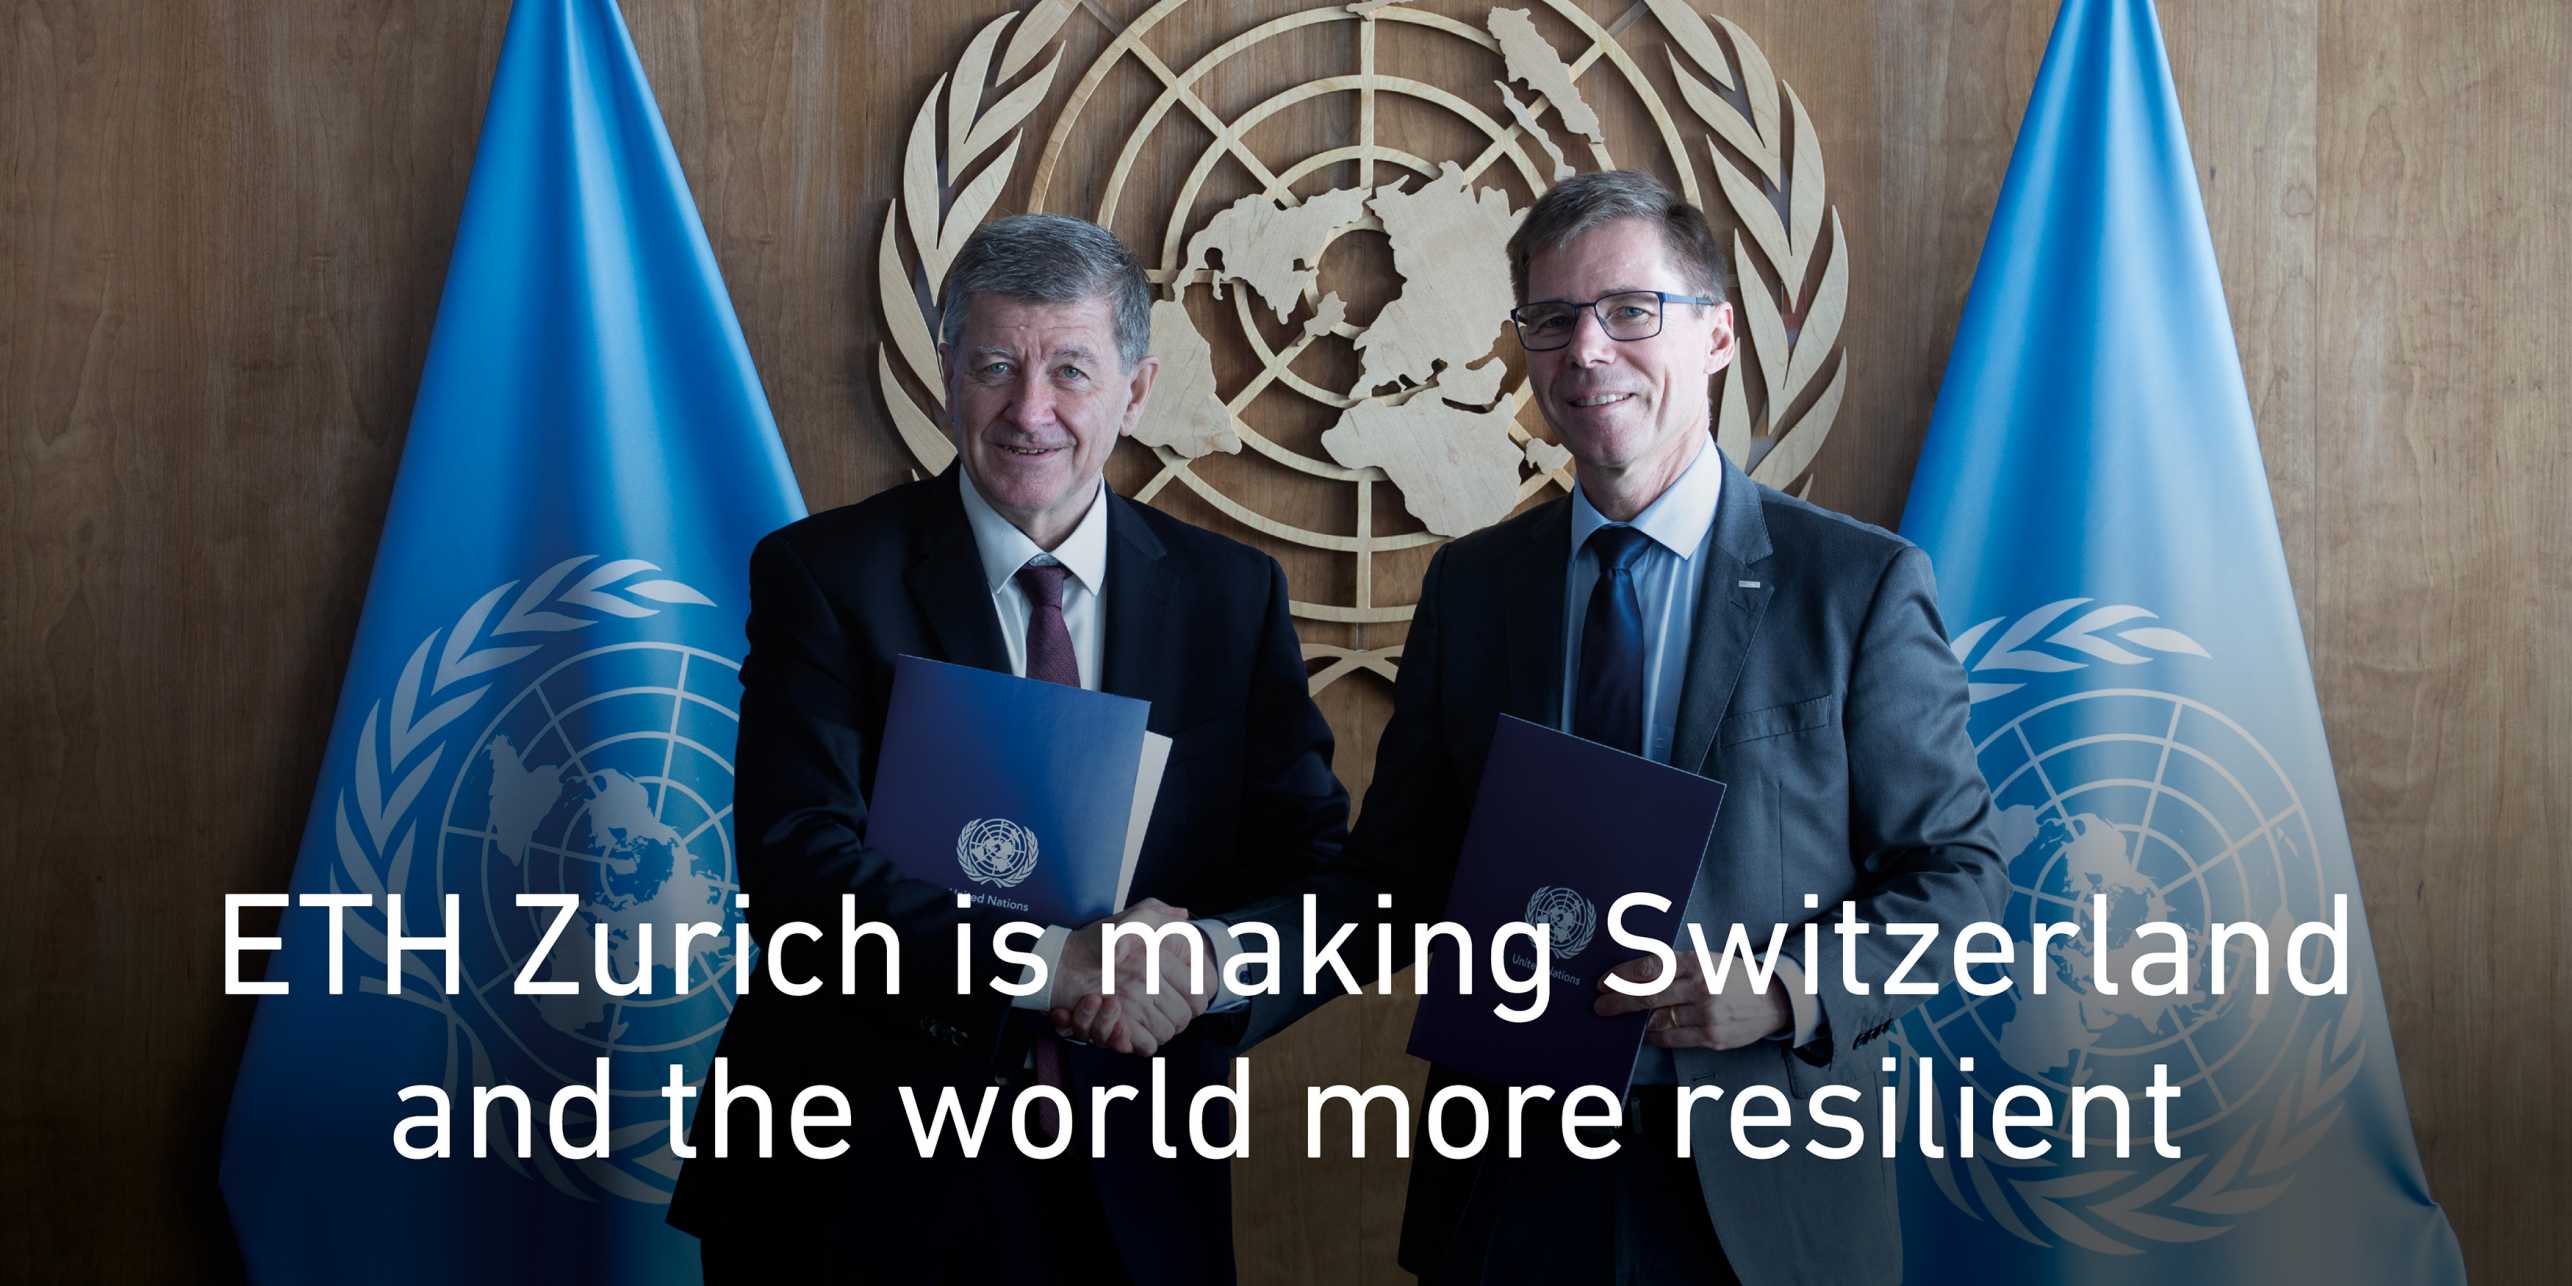 Two men are standing in front of the UN logo and two UN flags and shaking hands. Text: ETH Zurich is making Switzerland and the world more resilient. Link to news article on the partnership with the UN.